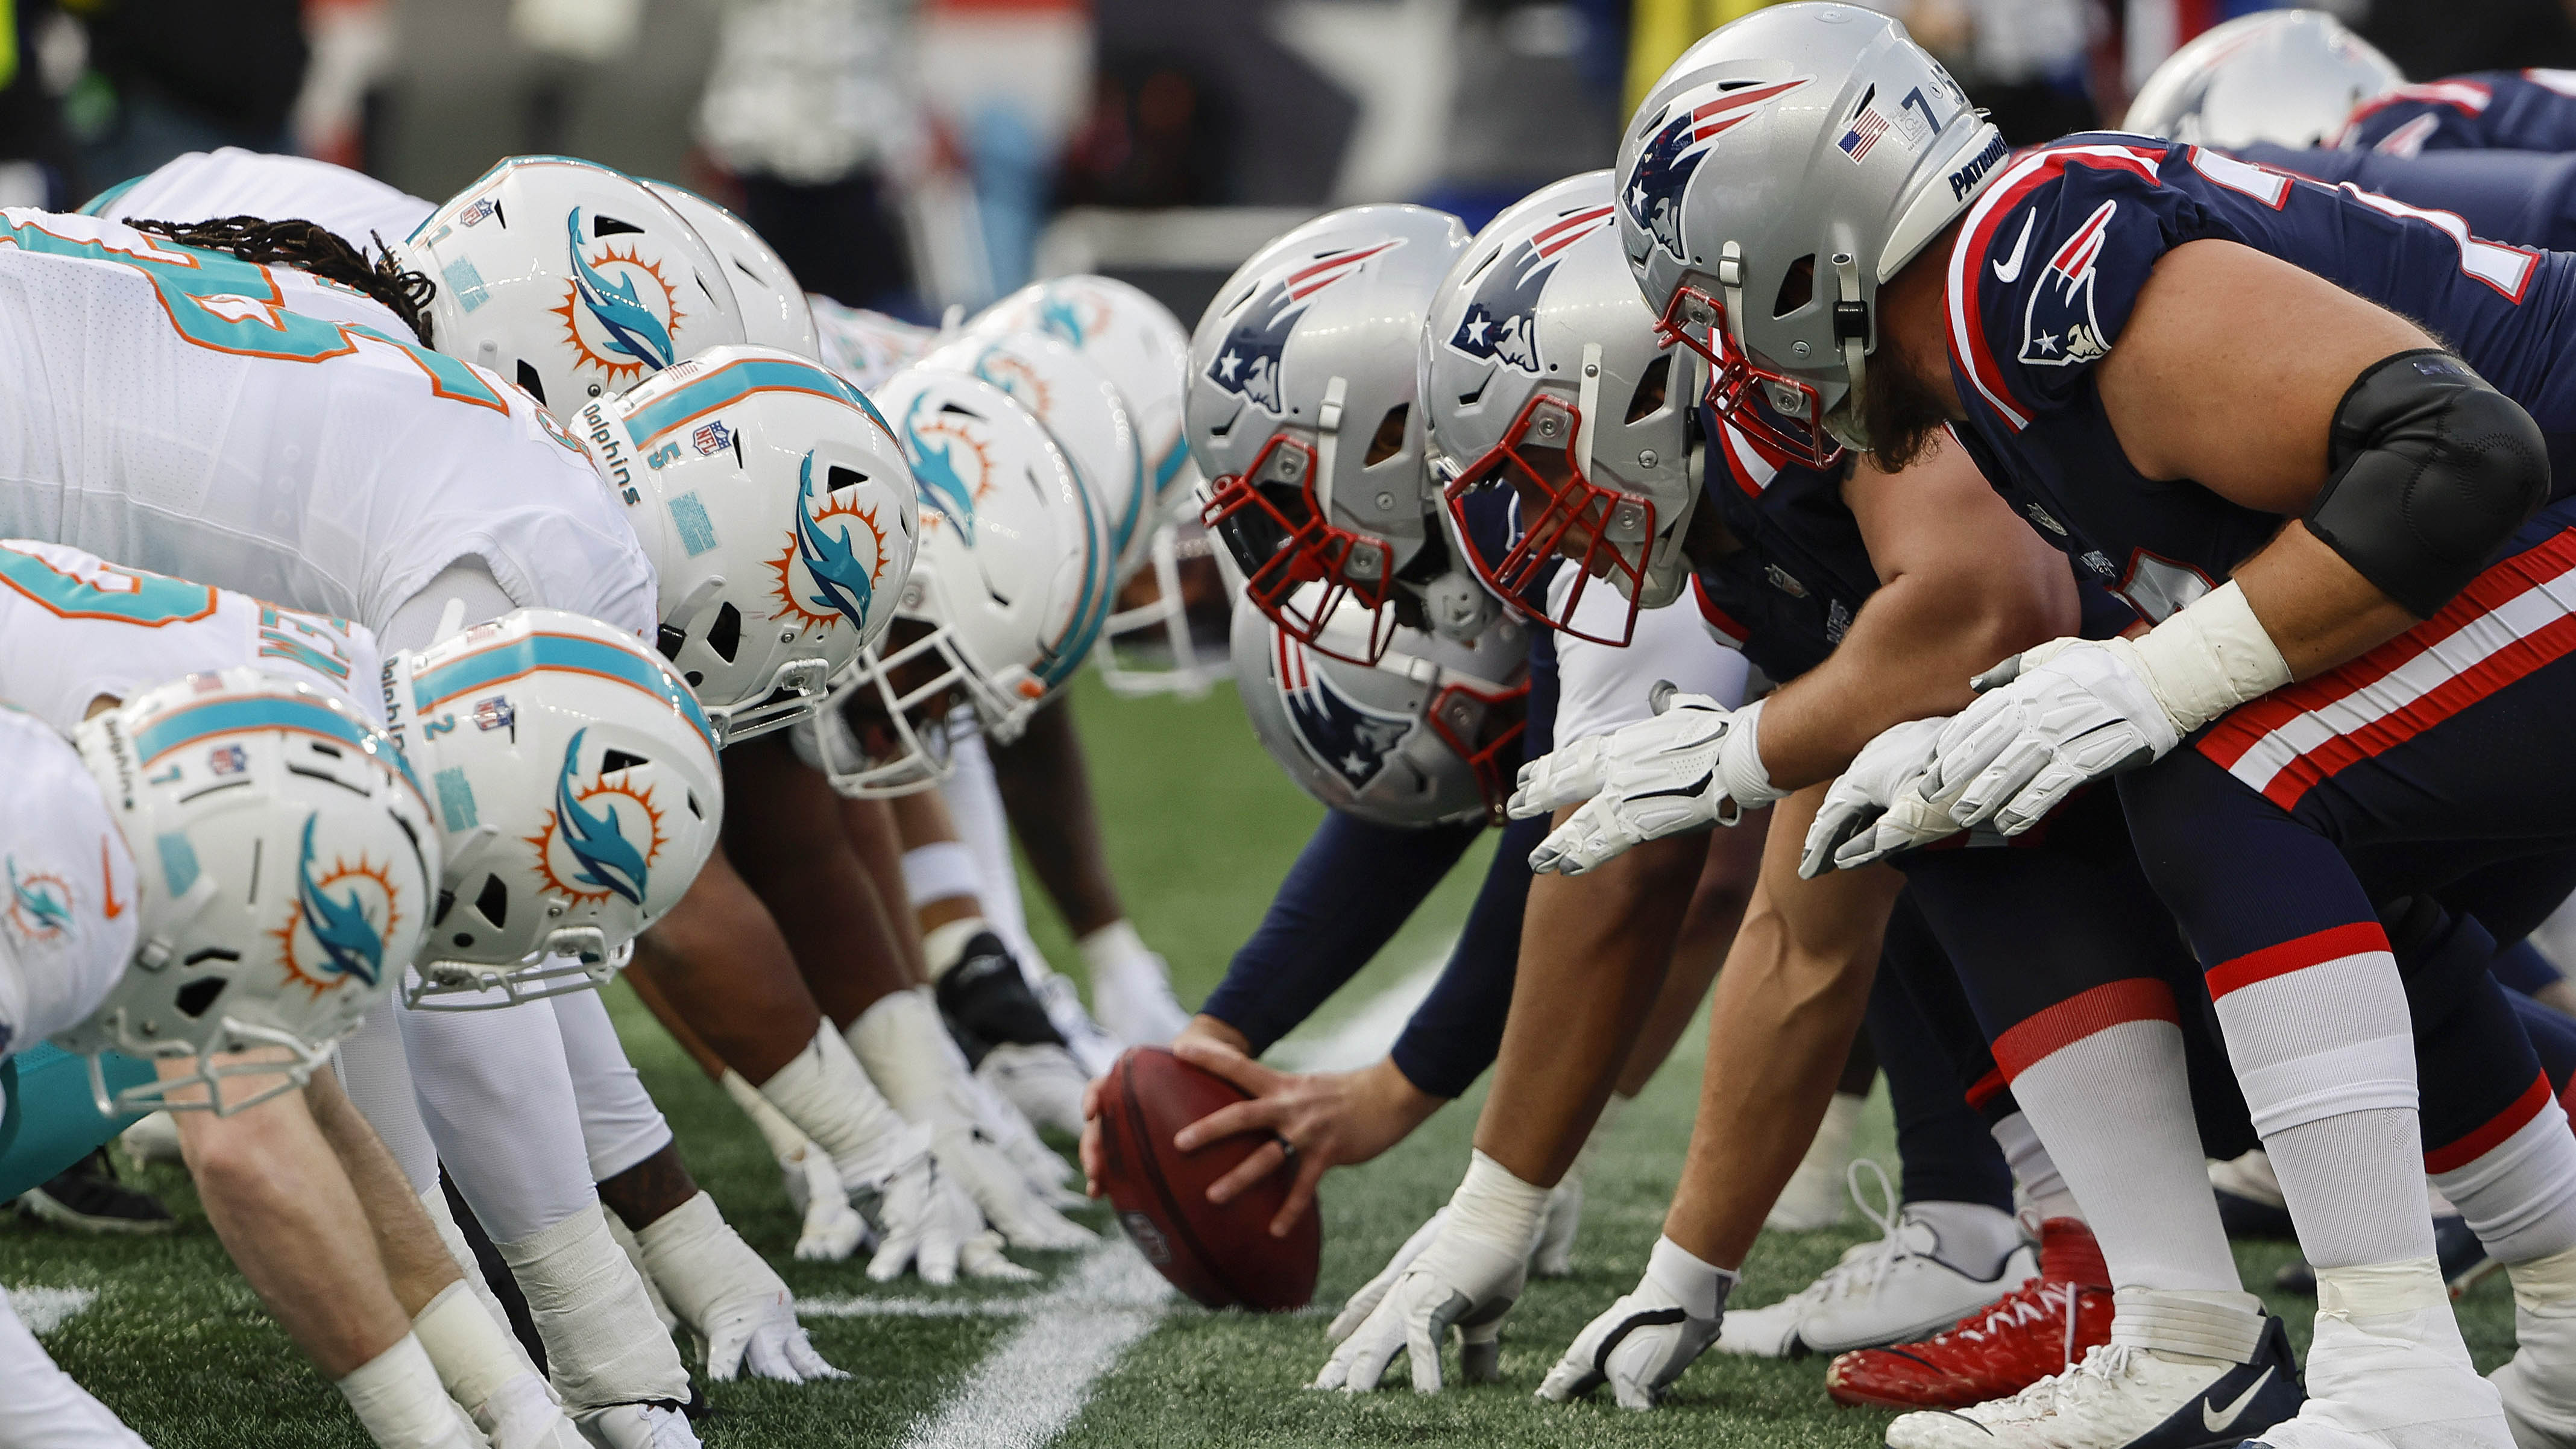 Patriots vs. Dolphins: How to watch Sunday Night Football on NBC and  Peacock – NBC Sports Boston